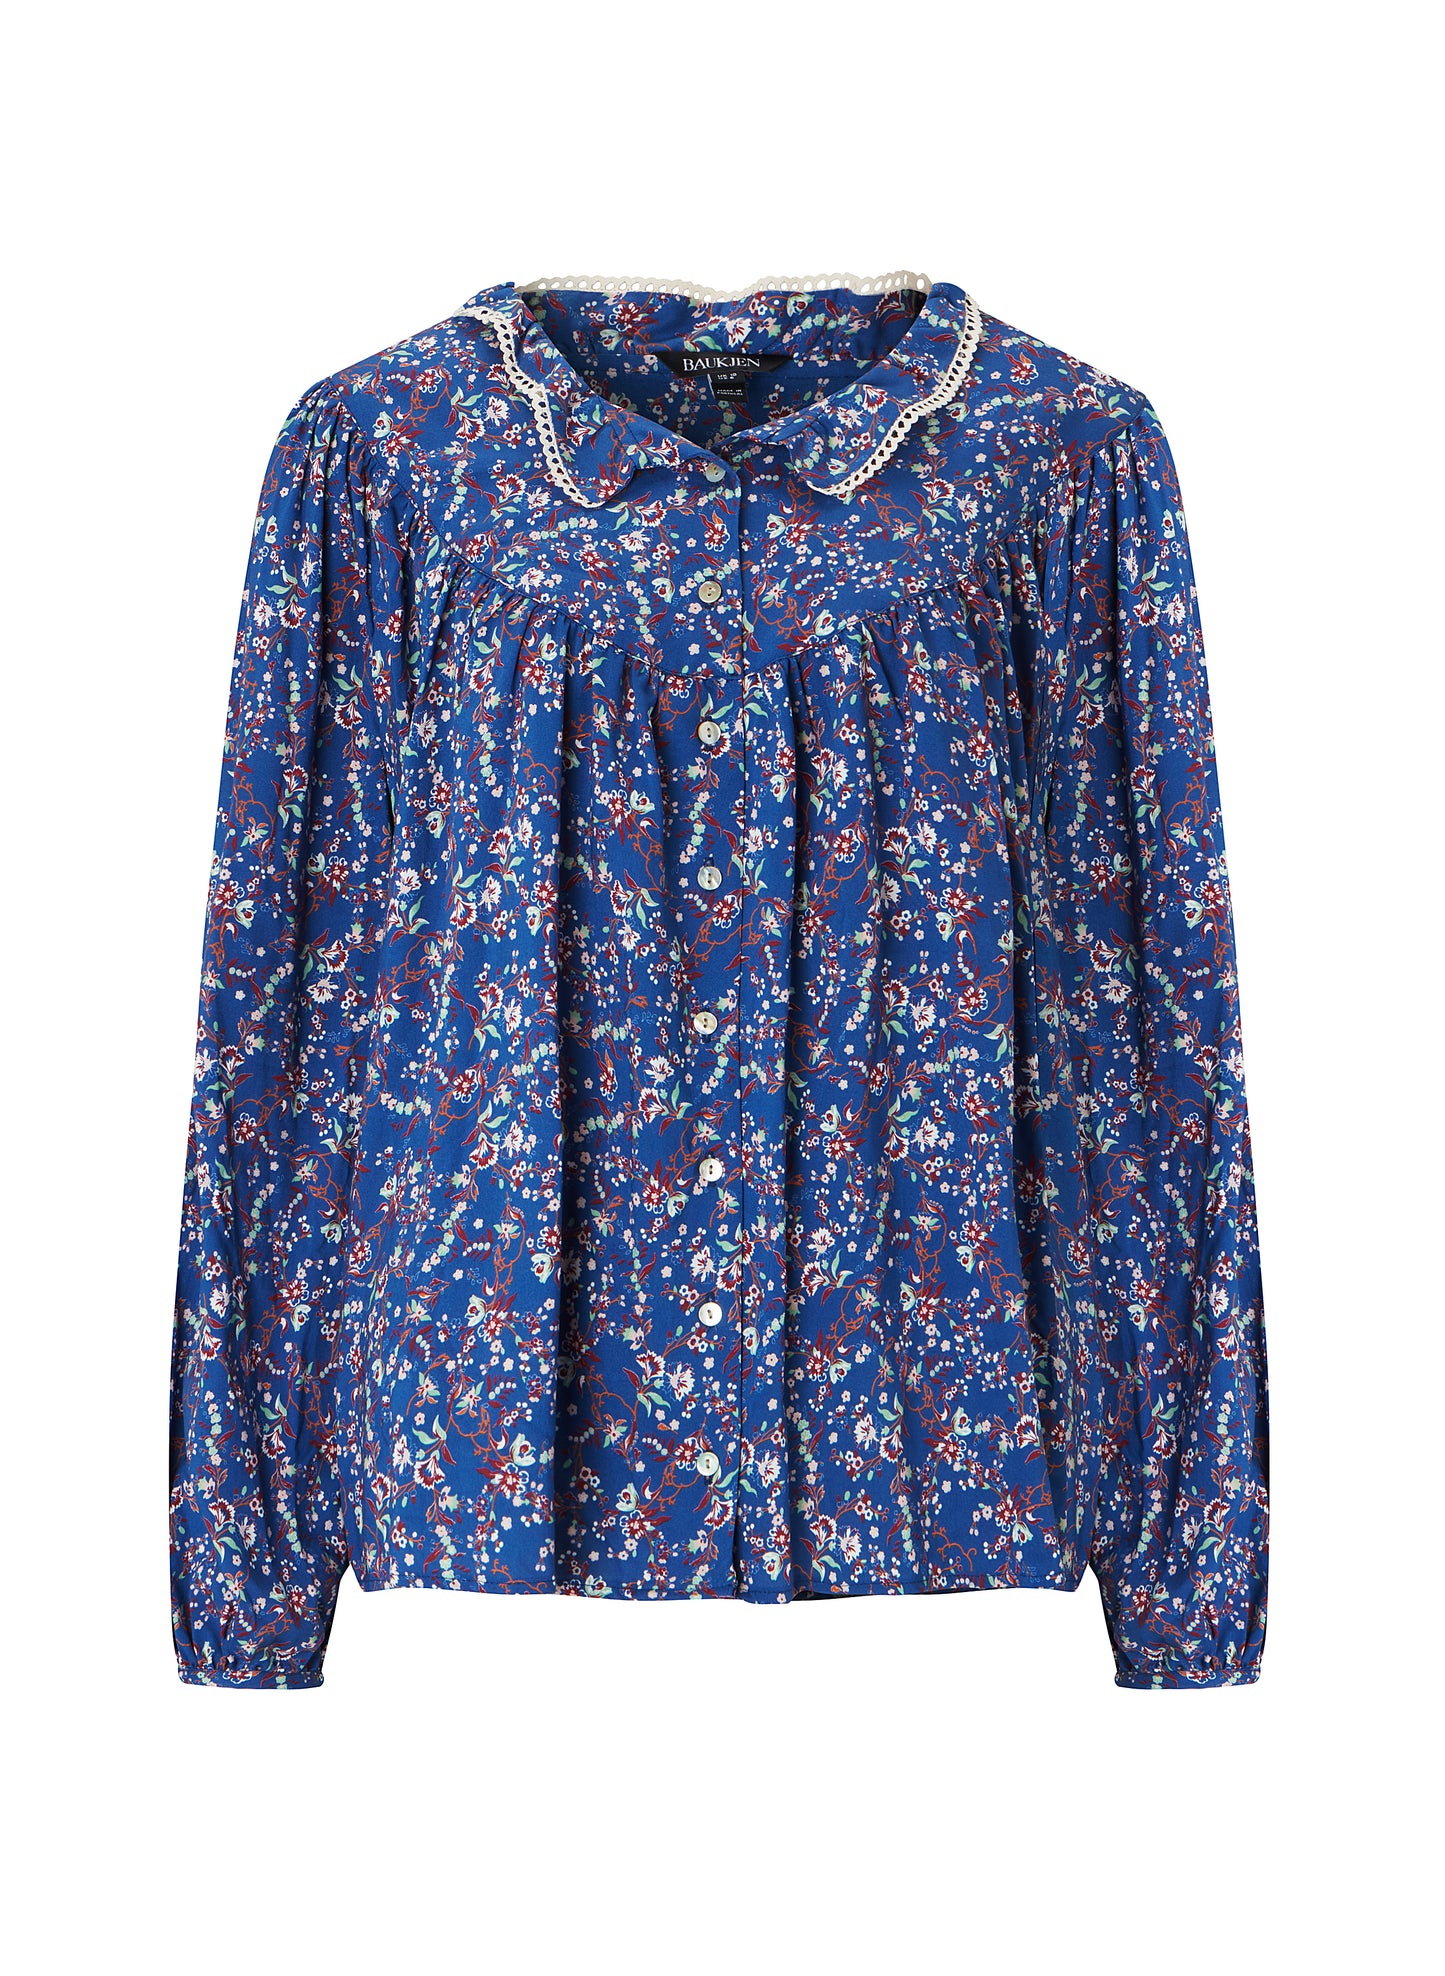 Pre-Loved Cece Smock Blouse with LENZING™ ECOVERO™